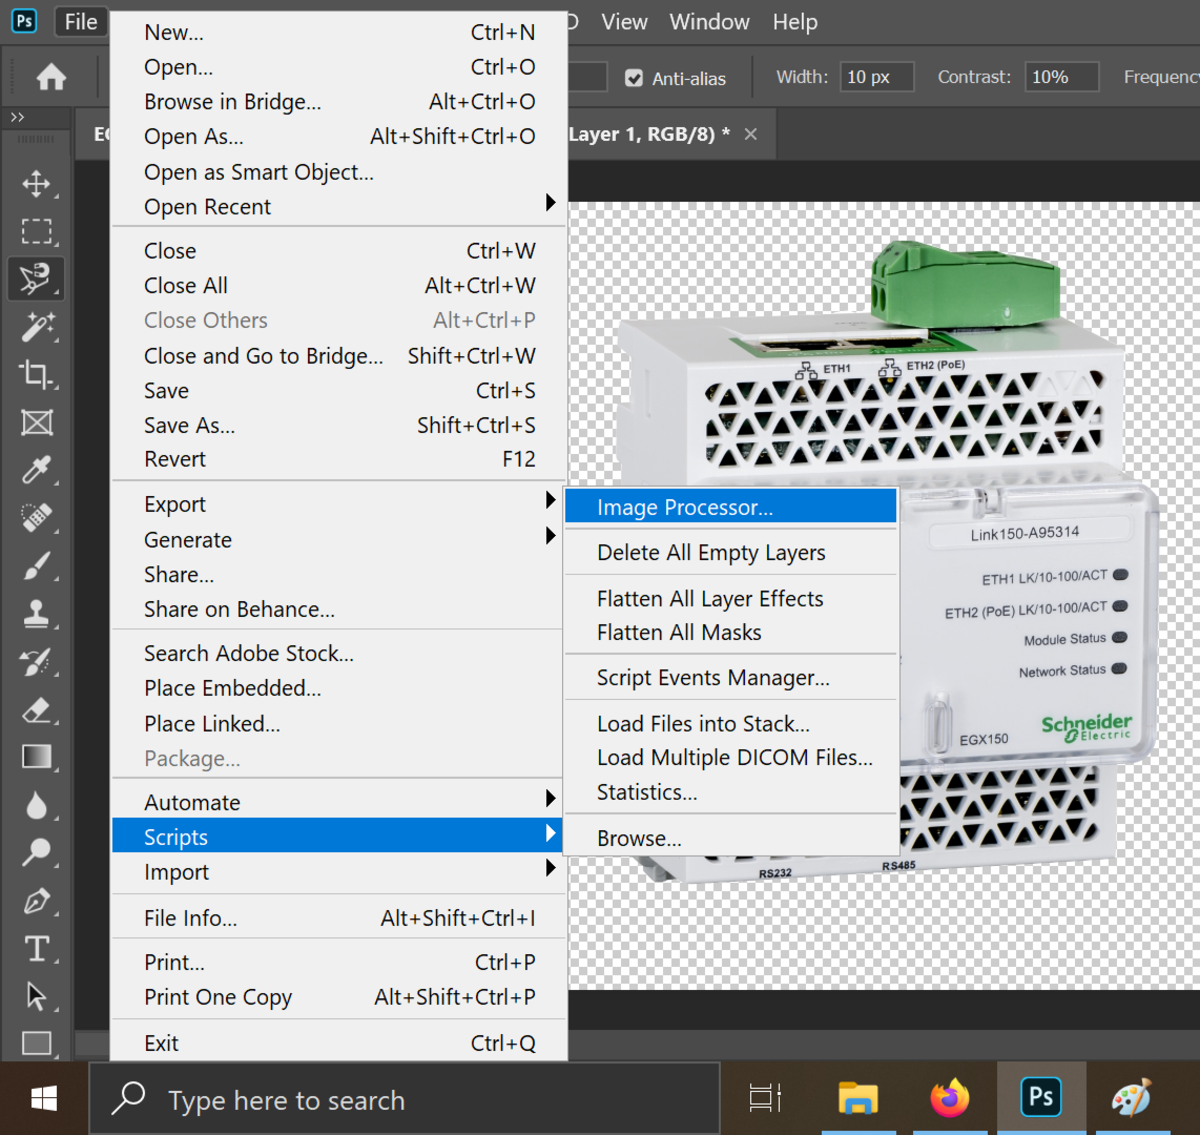 How to Convert PSD & PSB to JPG in Photoshop - TurboFuture